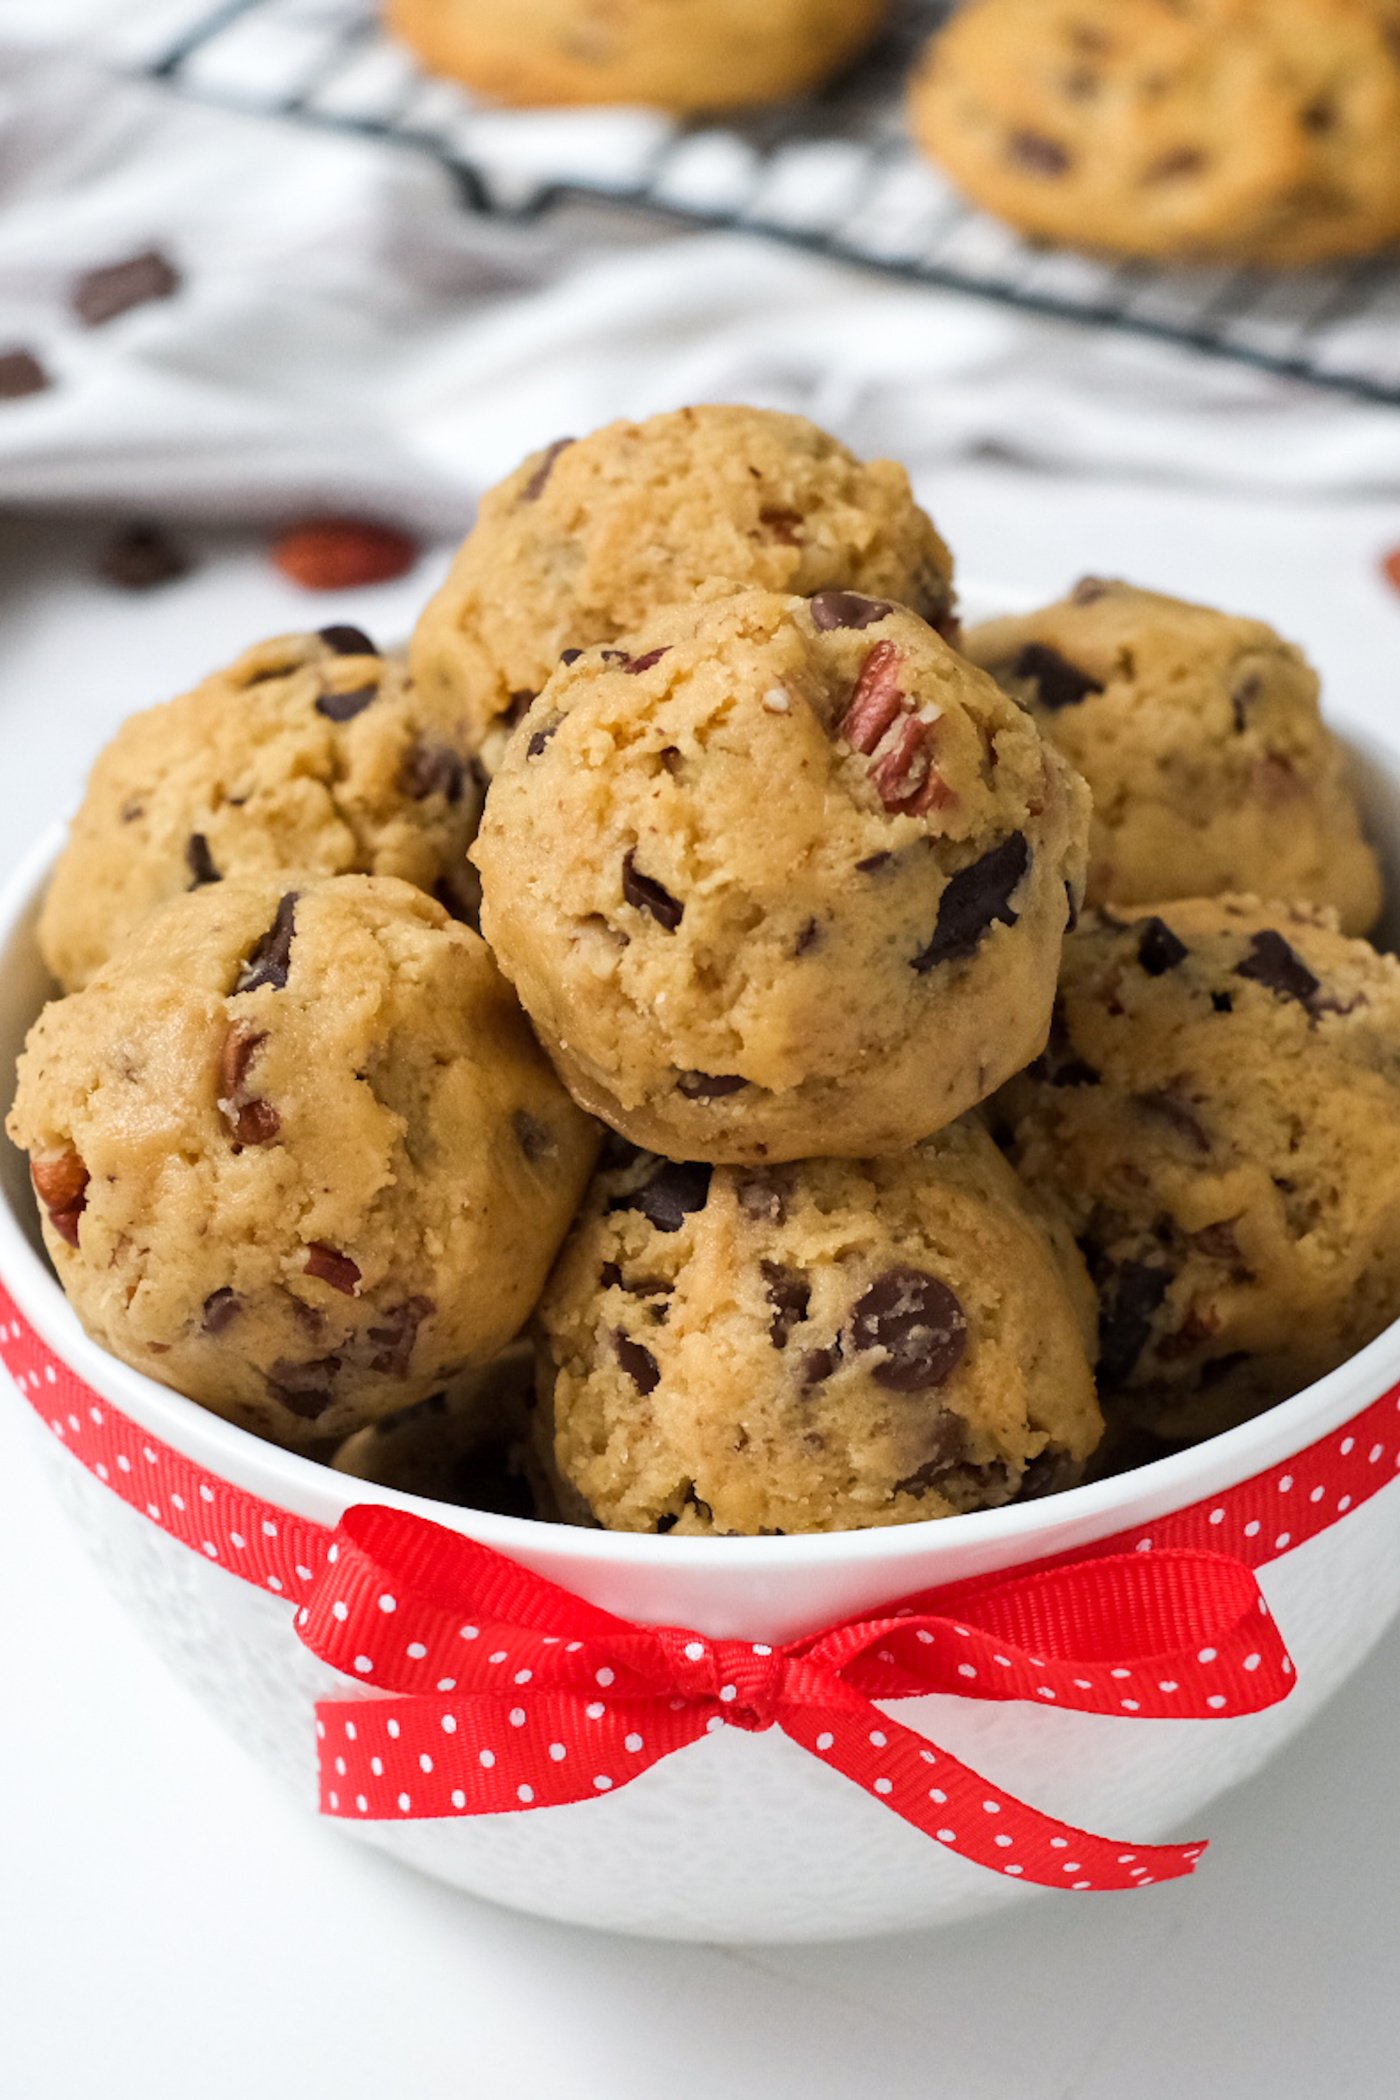 How to Scoop Cookie Dough: Easy Baking Tips for Dropping Drop Cookie Dough